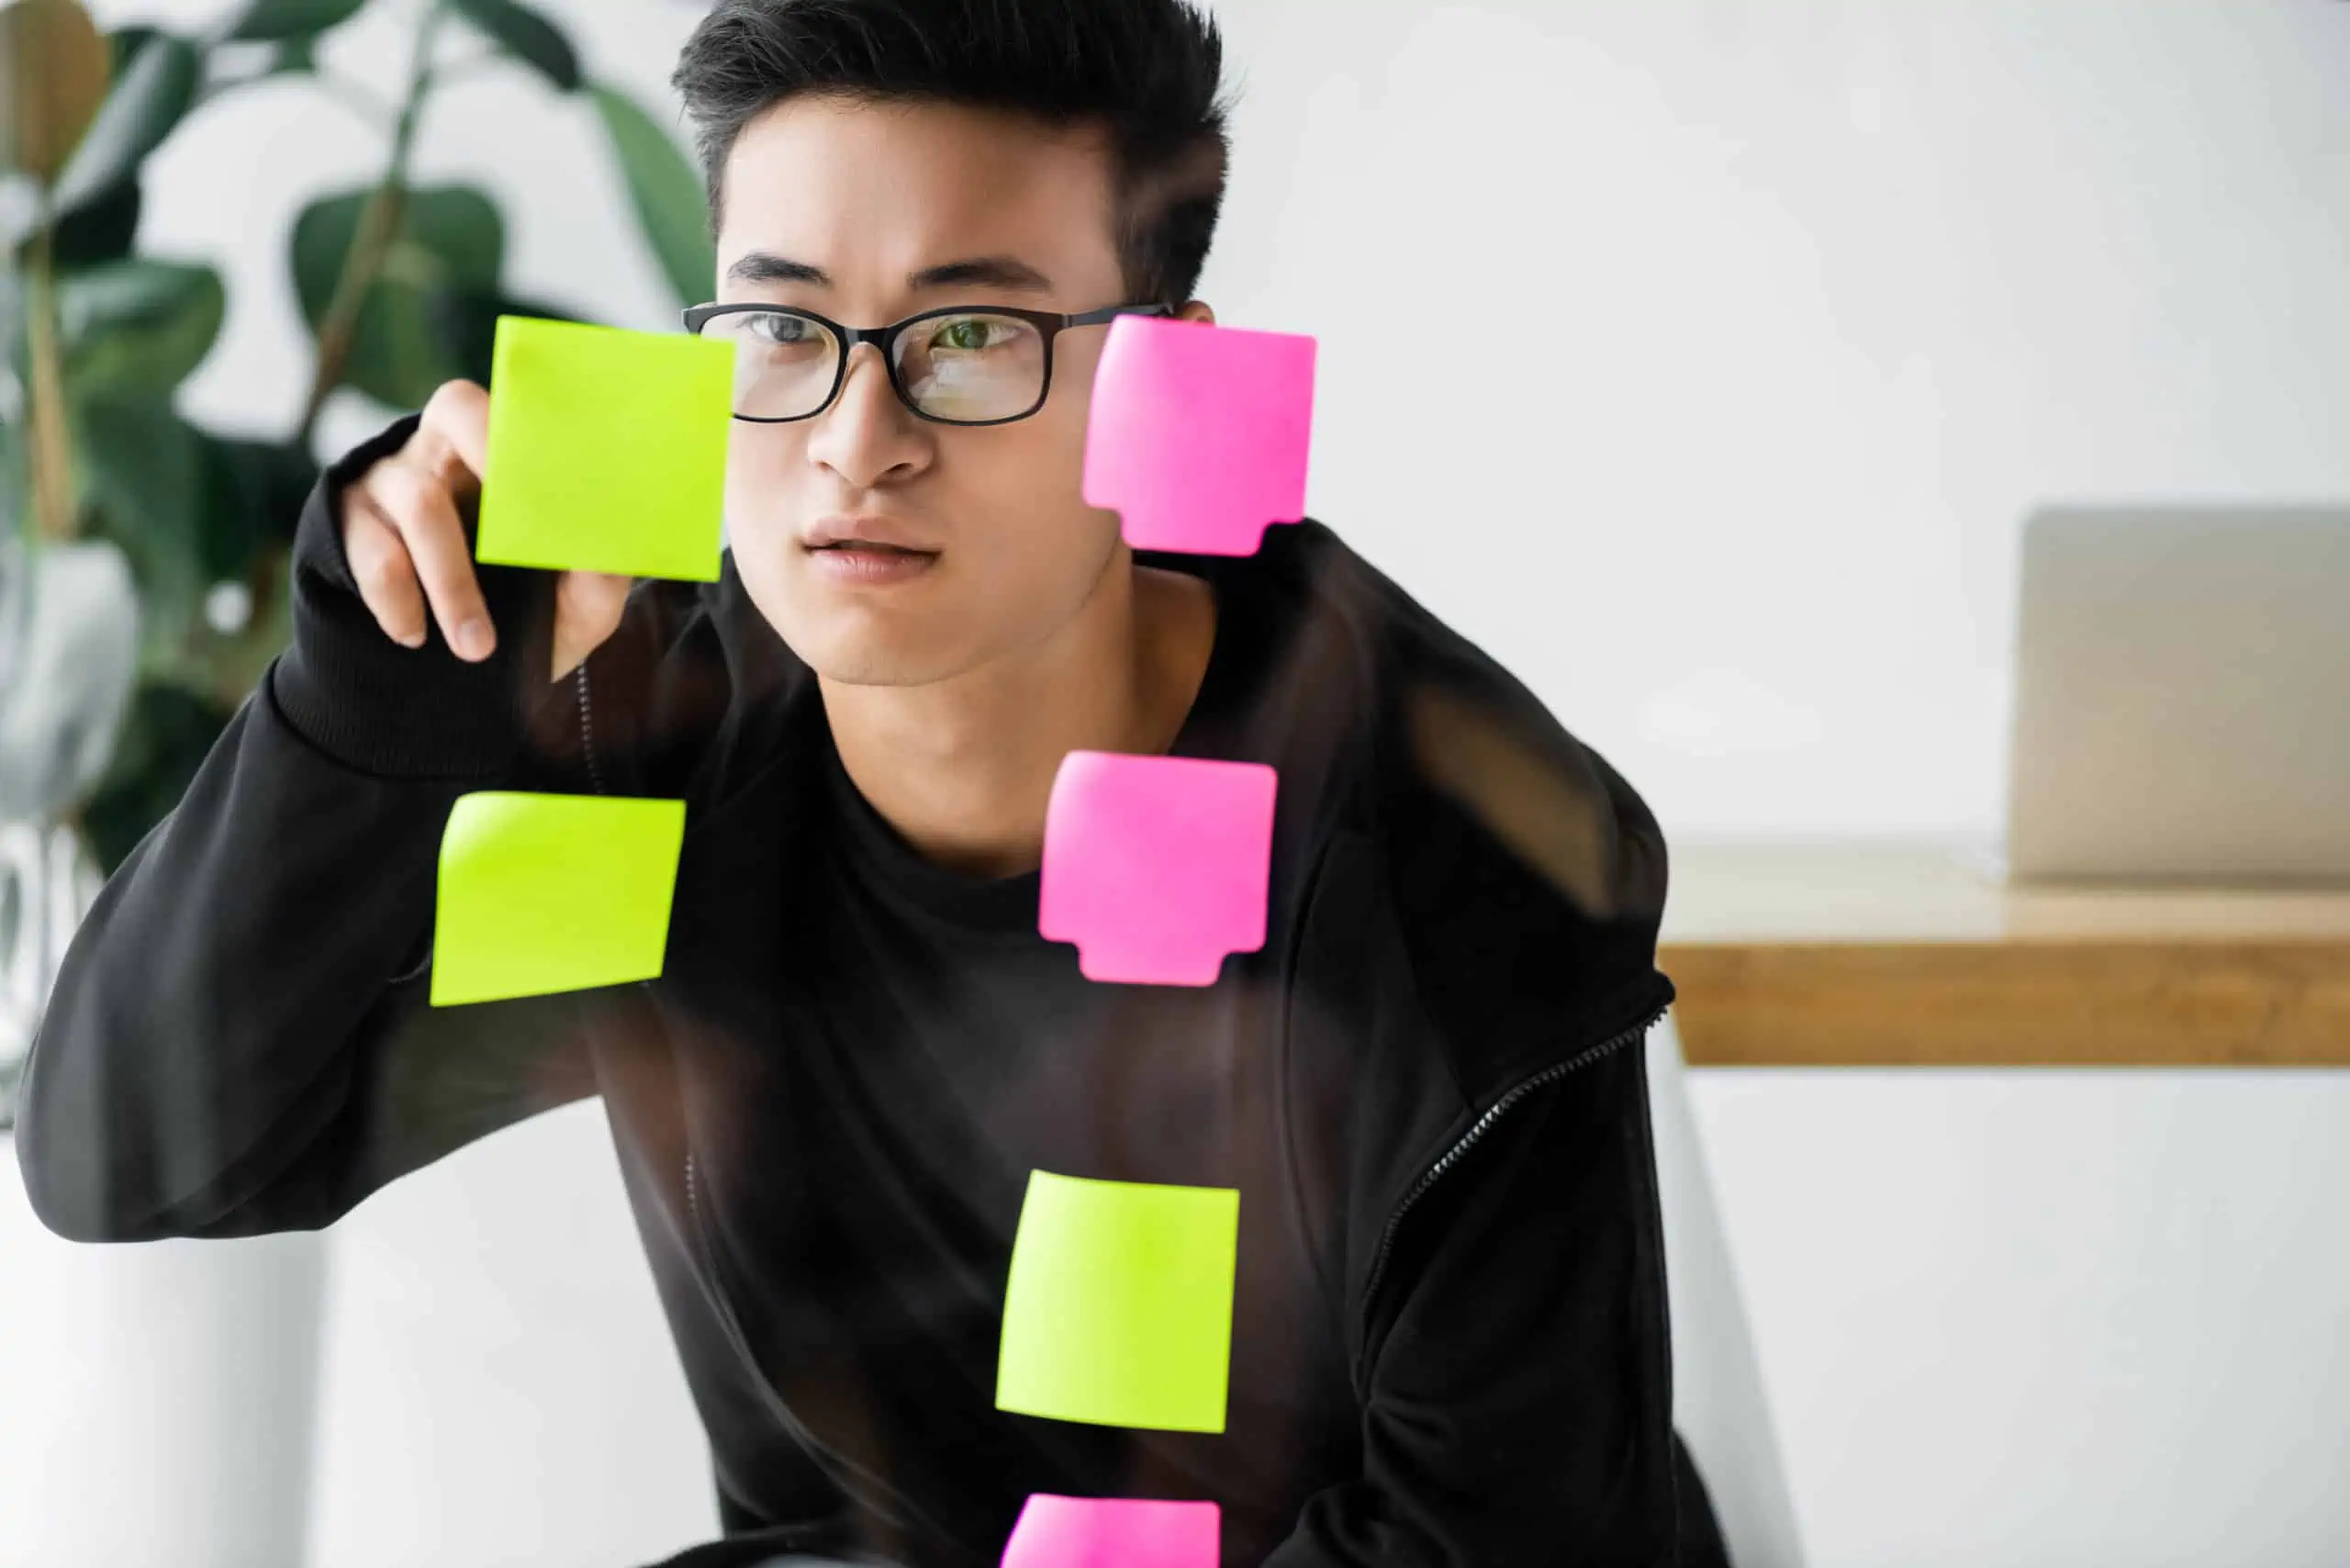 Young Asian man organizing Post-It notes containing a plan to implement financial advice on a glass board.